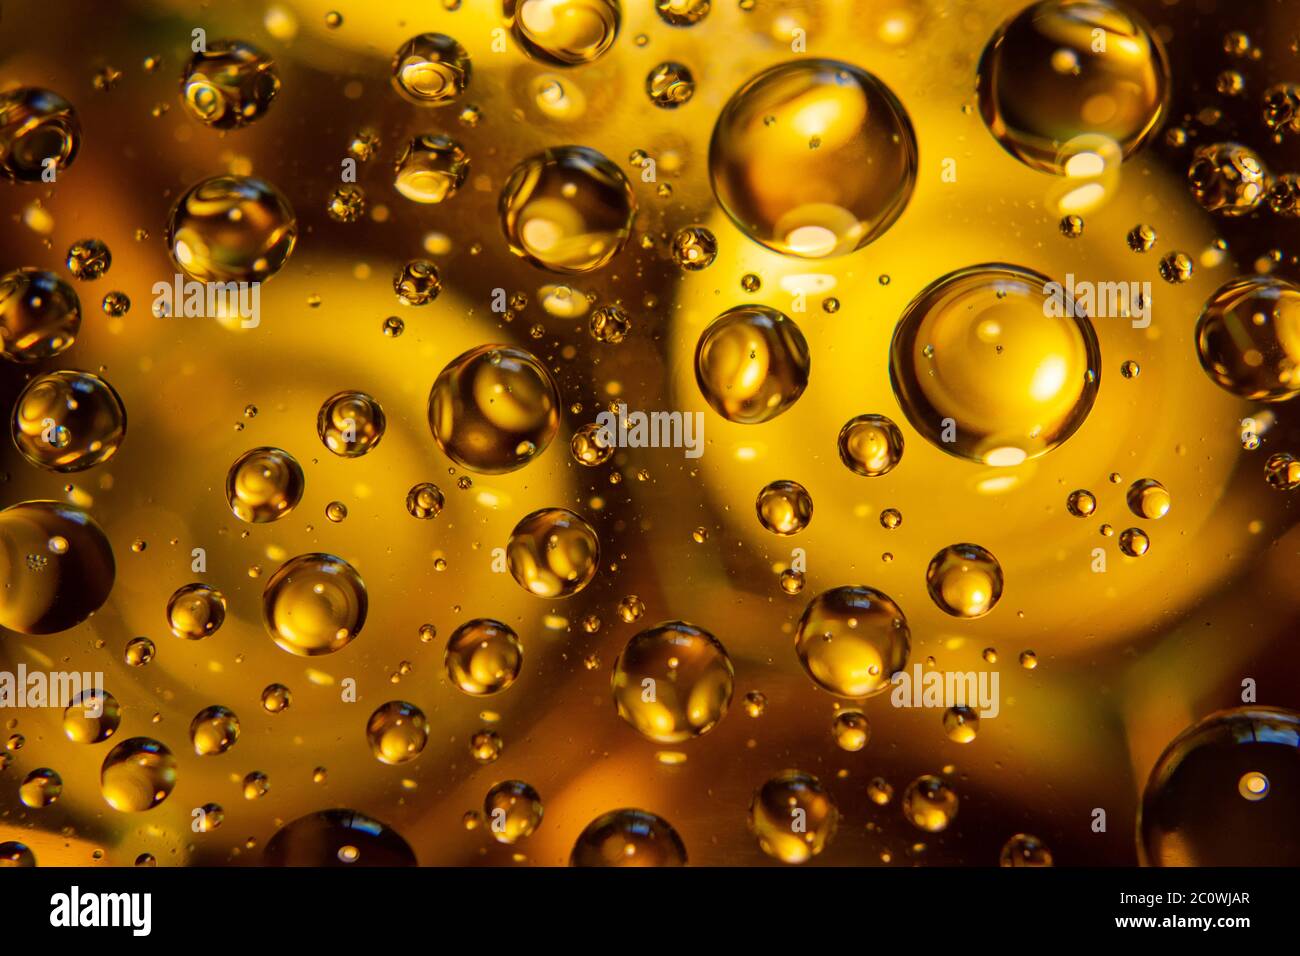 Abstract golden drops background Stock Photo